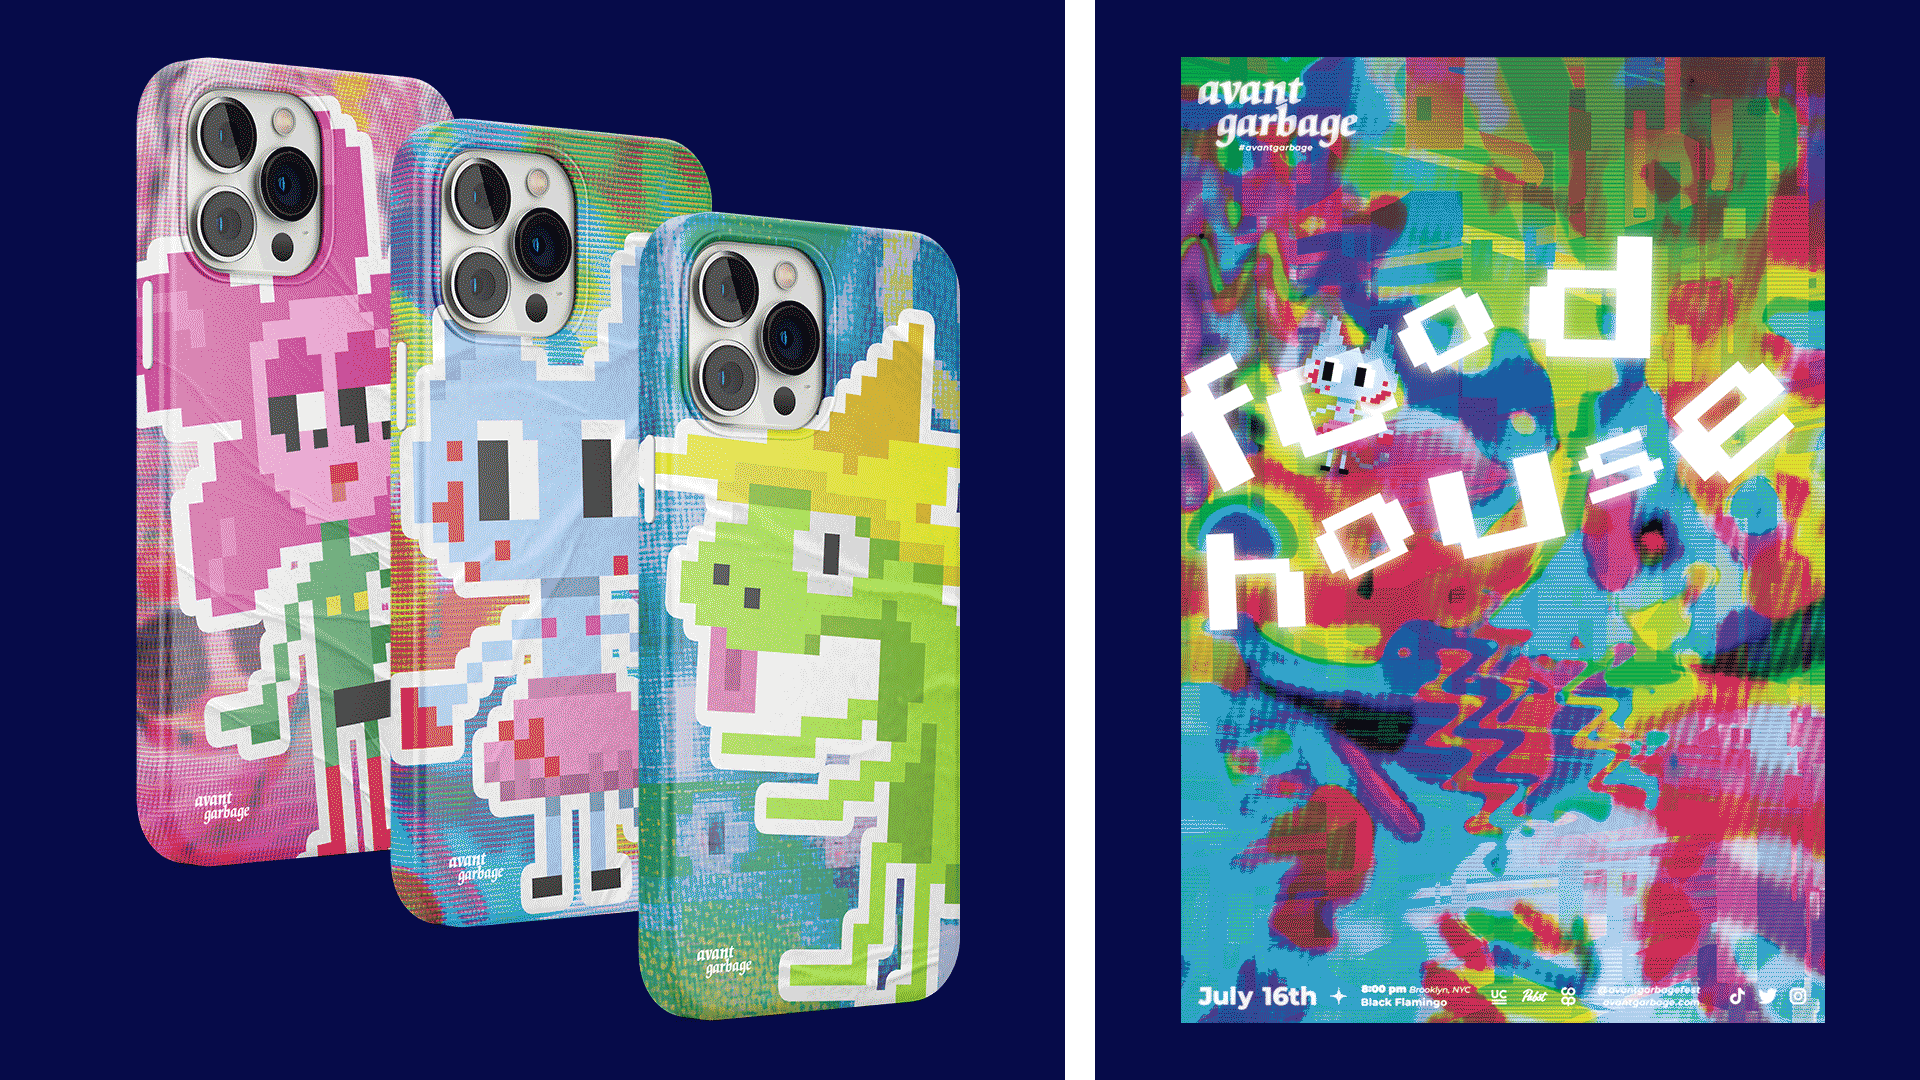 On the left are phone cases featuring pixel art of a blue cat, pink flower, and green gecko on a dark blue backdrop. On the right is a poster that changes between three designs of digital collage and type featuring the same pixel art as the phone cases.